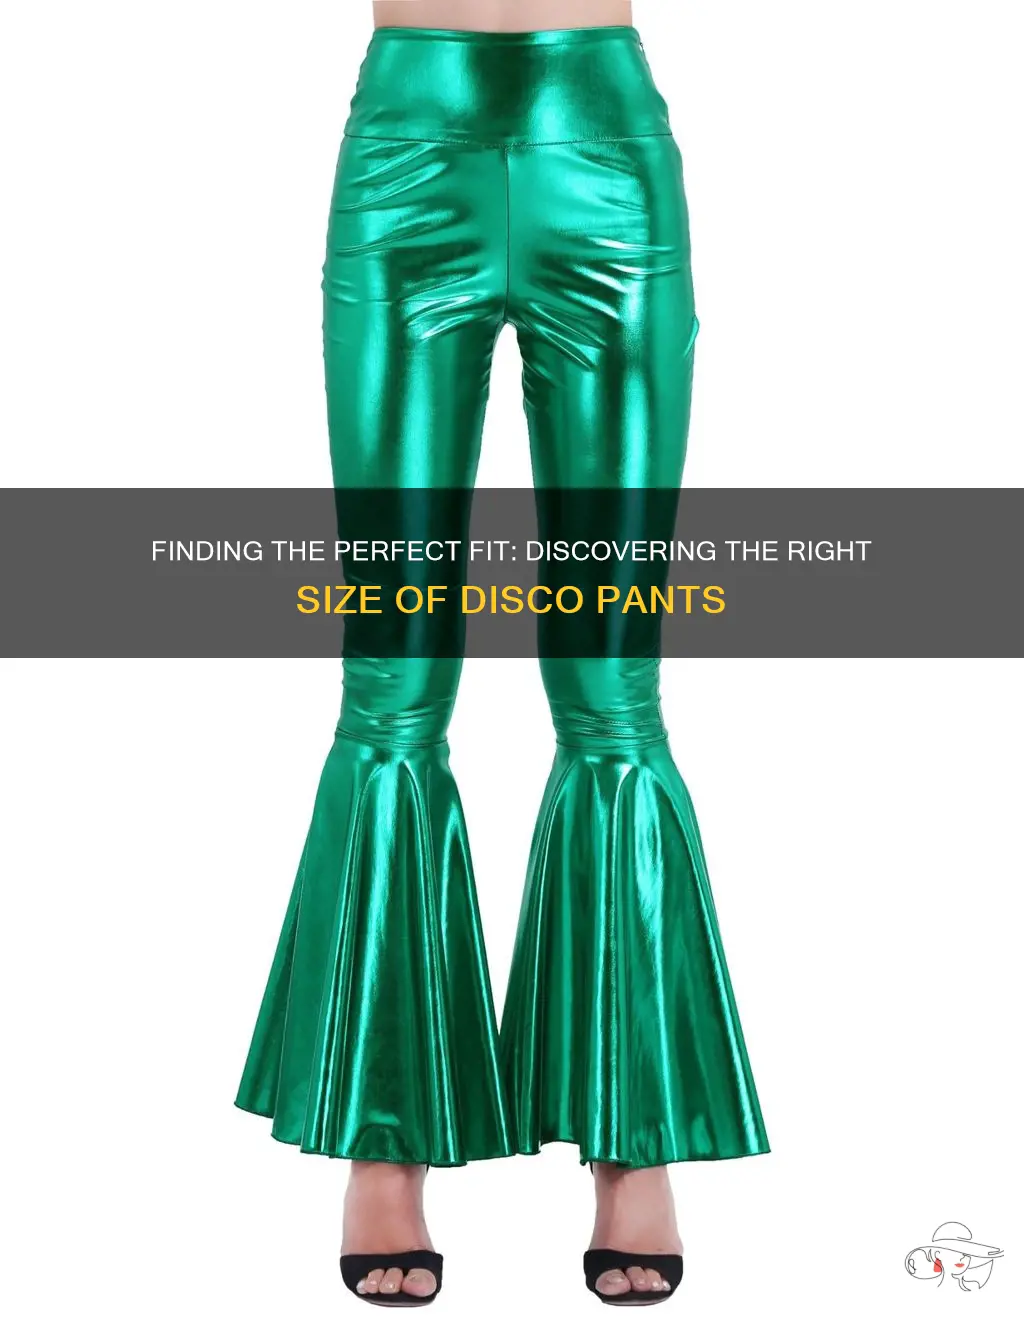 what size disco pants should I get